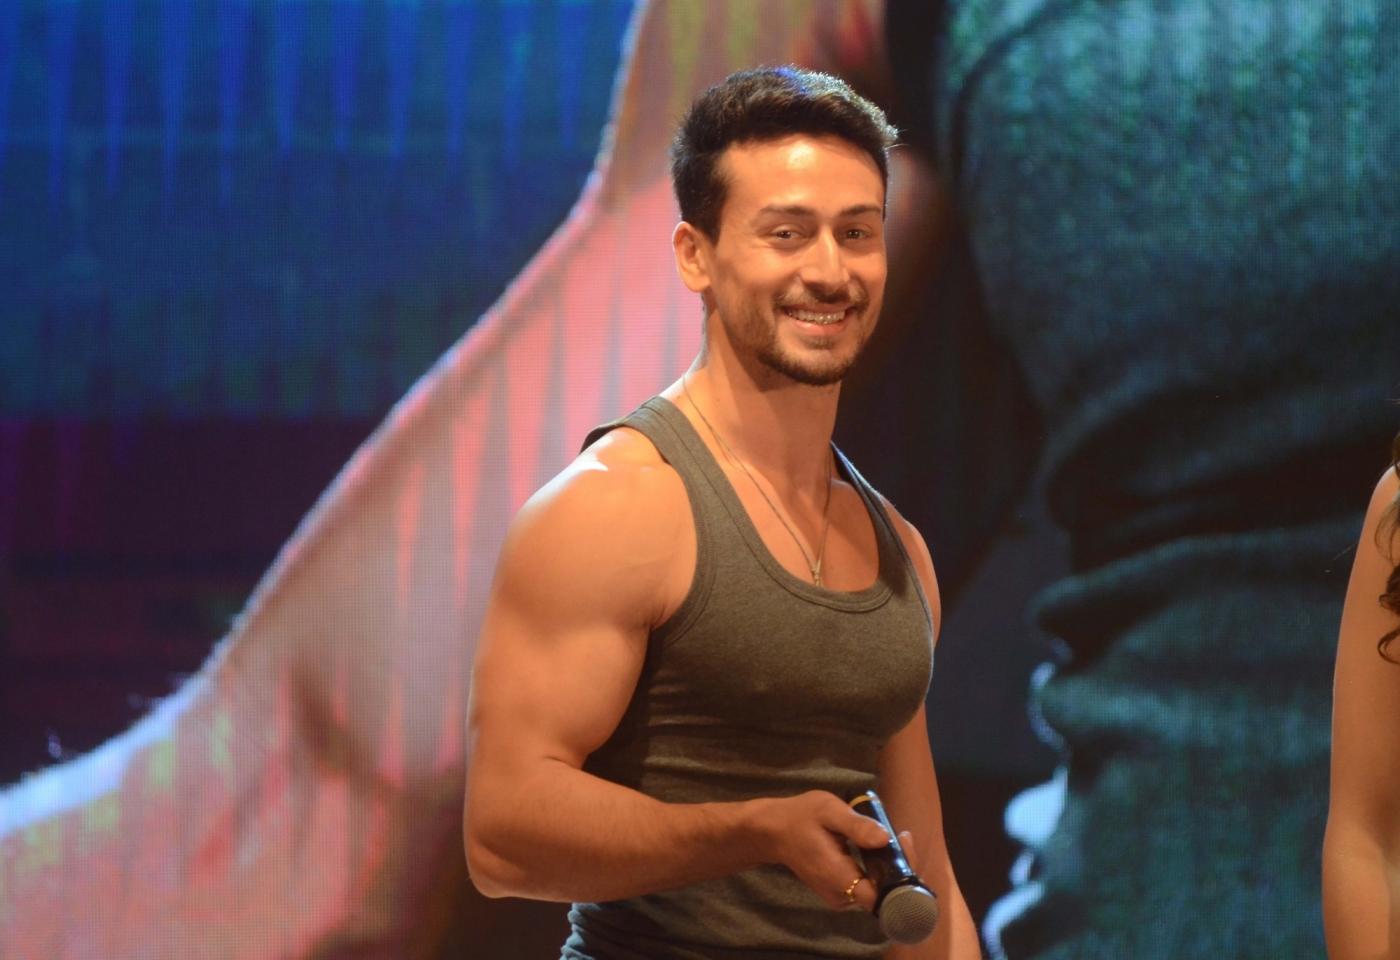 Mumbai: Actor Tiger Shroff during a promotional programme in Mumbai on Sept 11, 2018. (Photo: IANS) by .